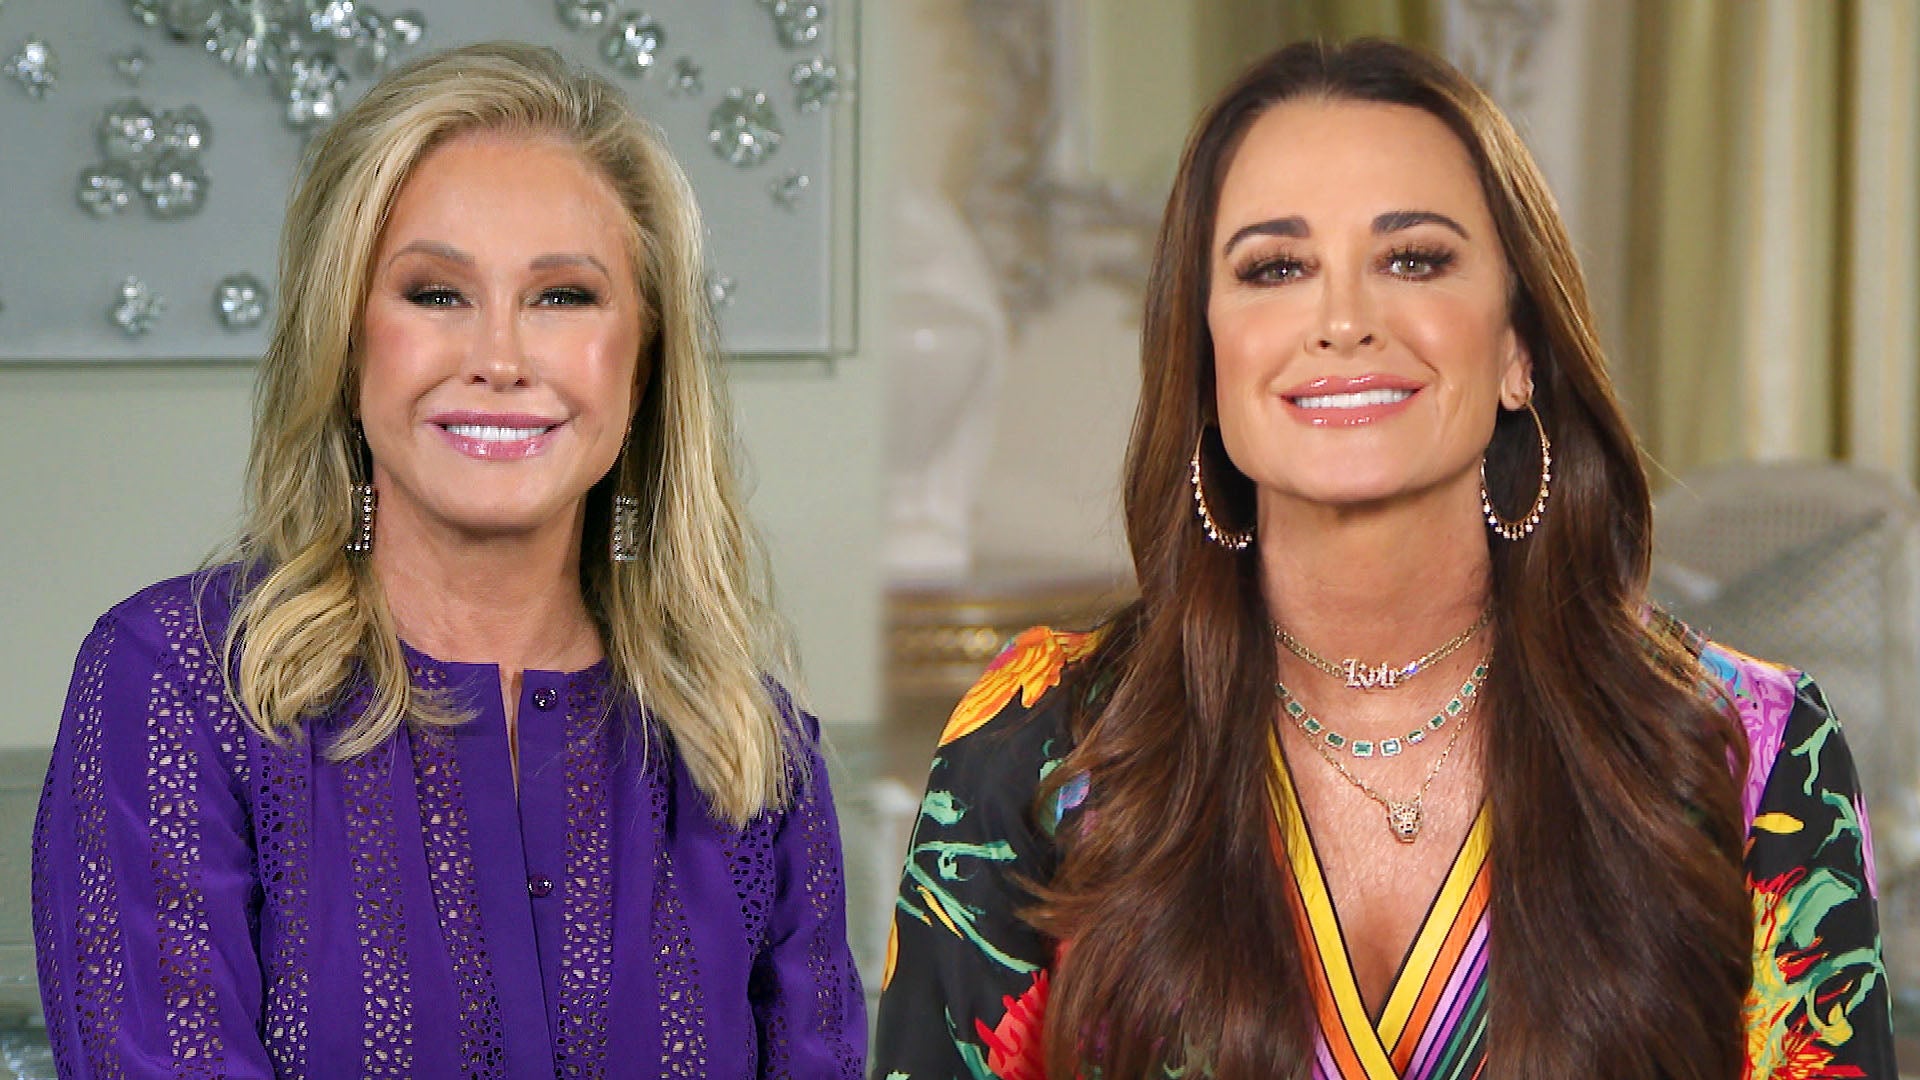 Kyle Richards Will 'Tell Her Own Story' About Split, Says Erika Jayne